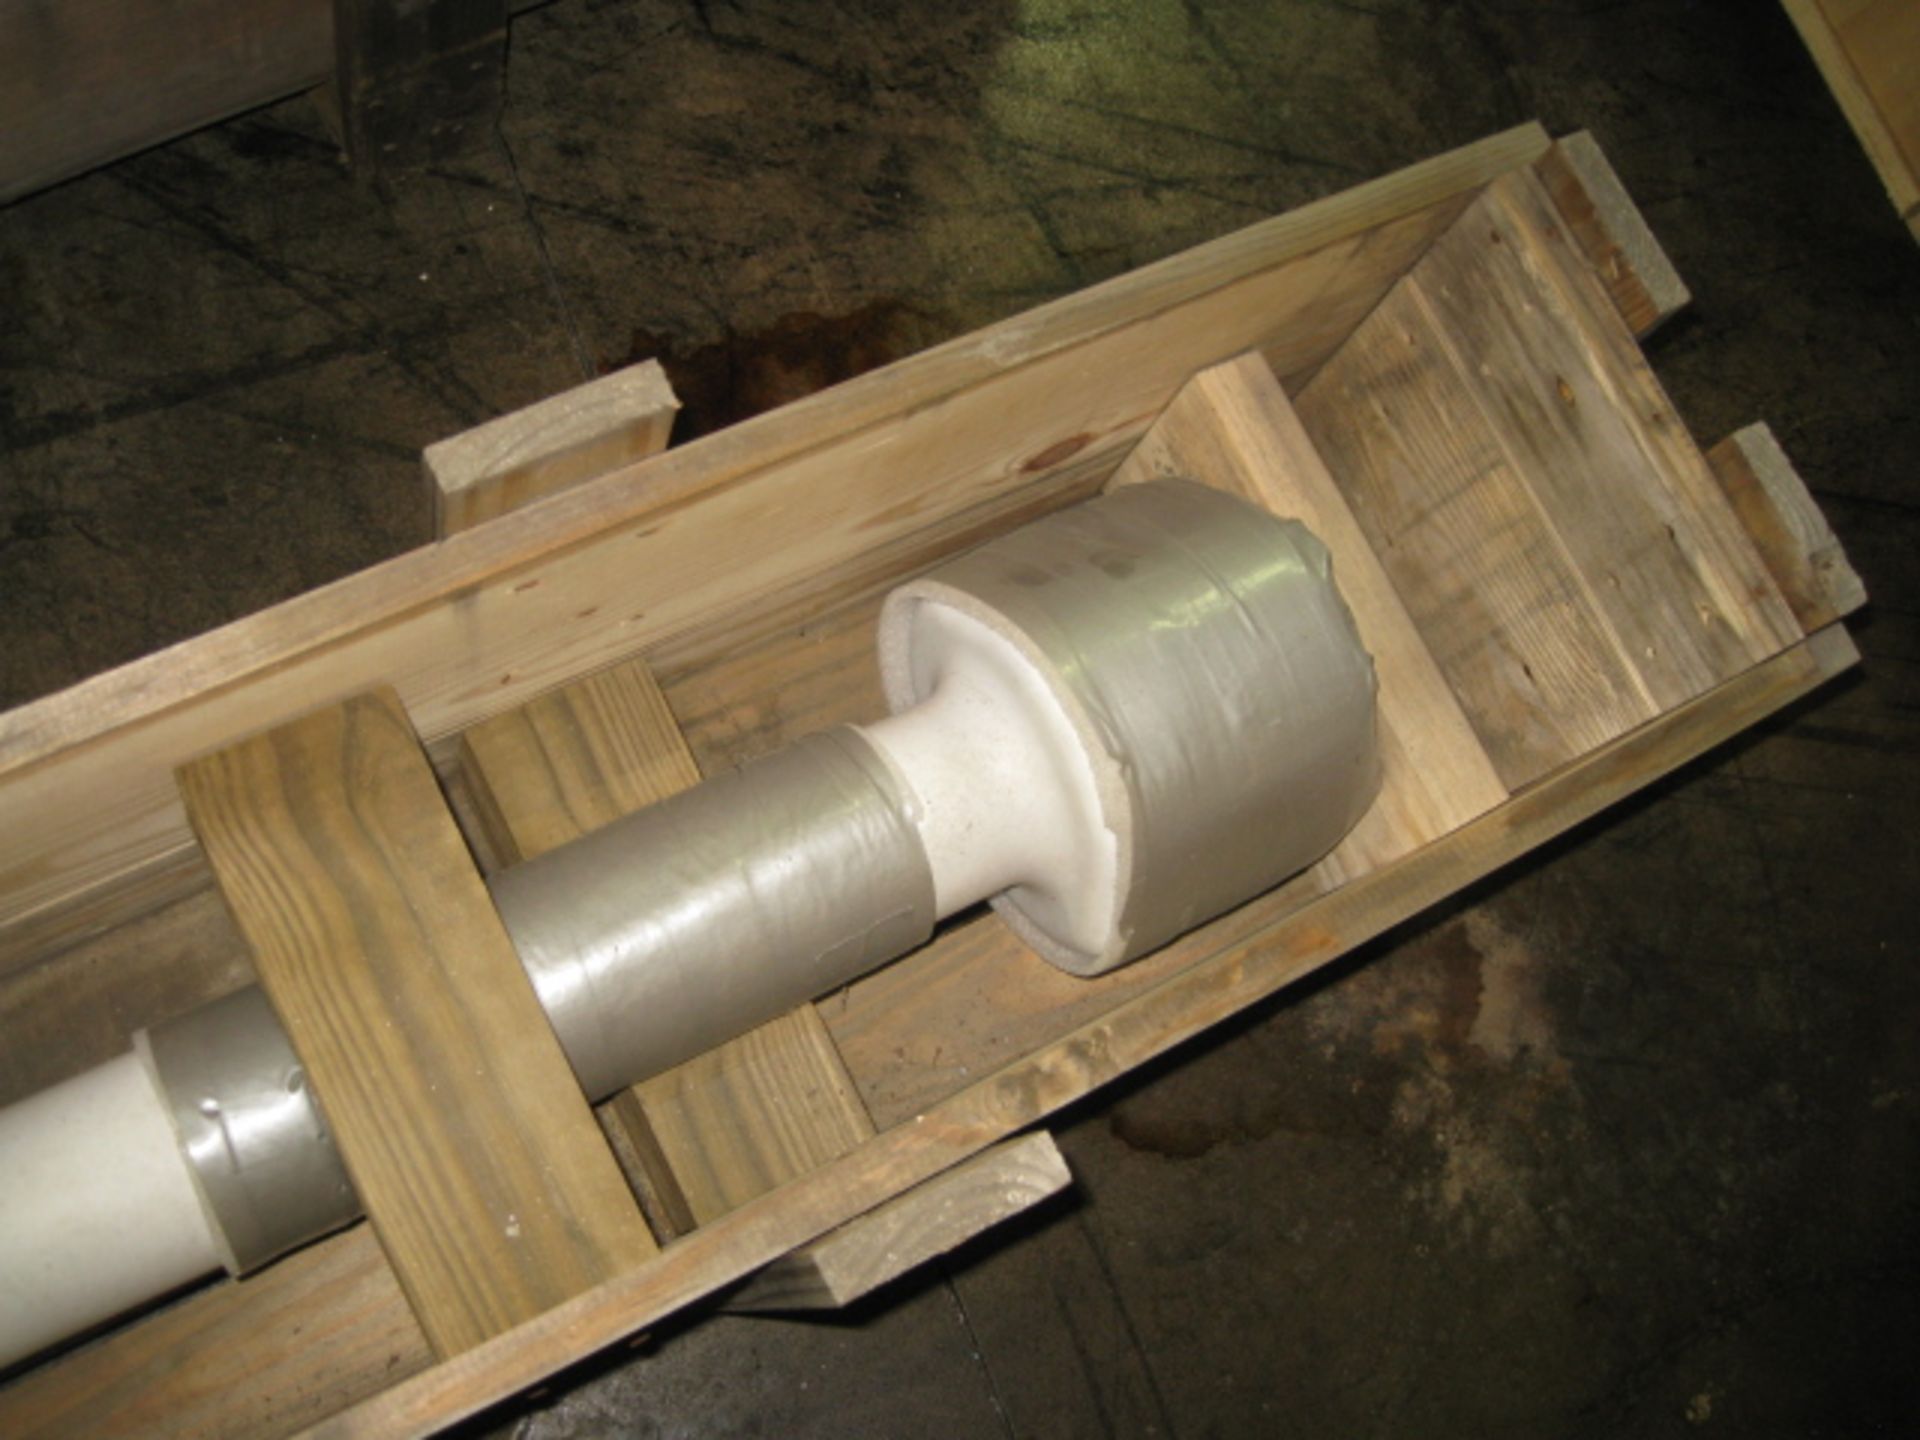 Glass-Lined Cryolock Mix Shaft, 72"L x 3"W - Image 2 of 3